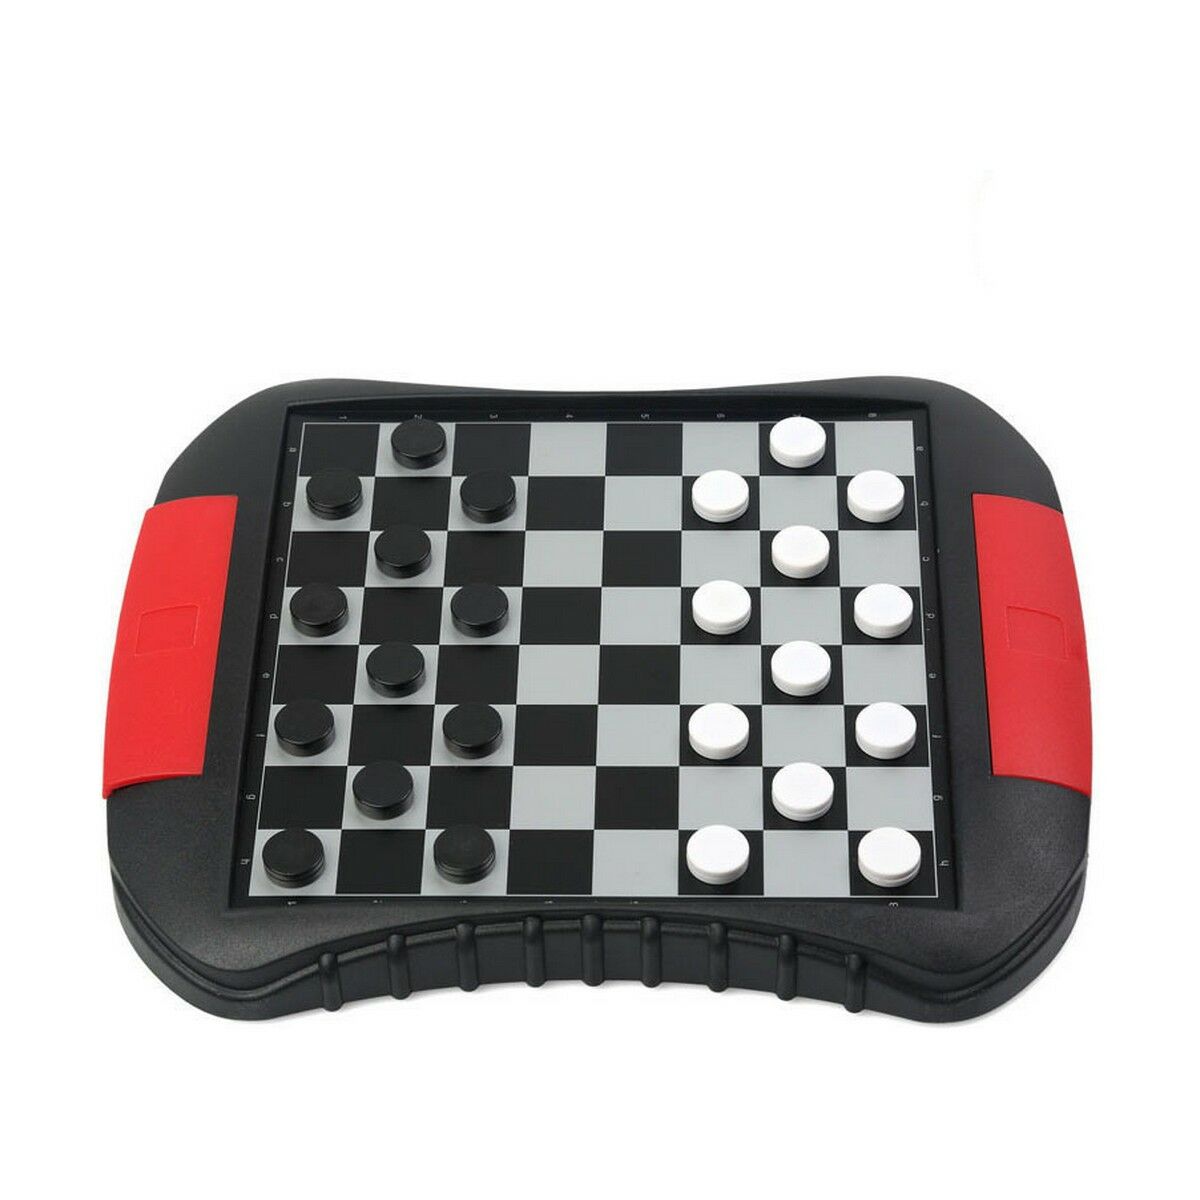 Checkers Pieces Magnetic 23 x 17 cm